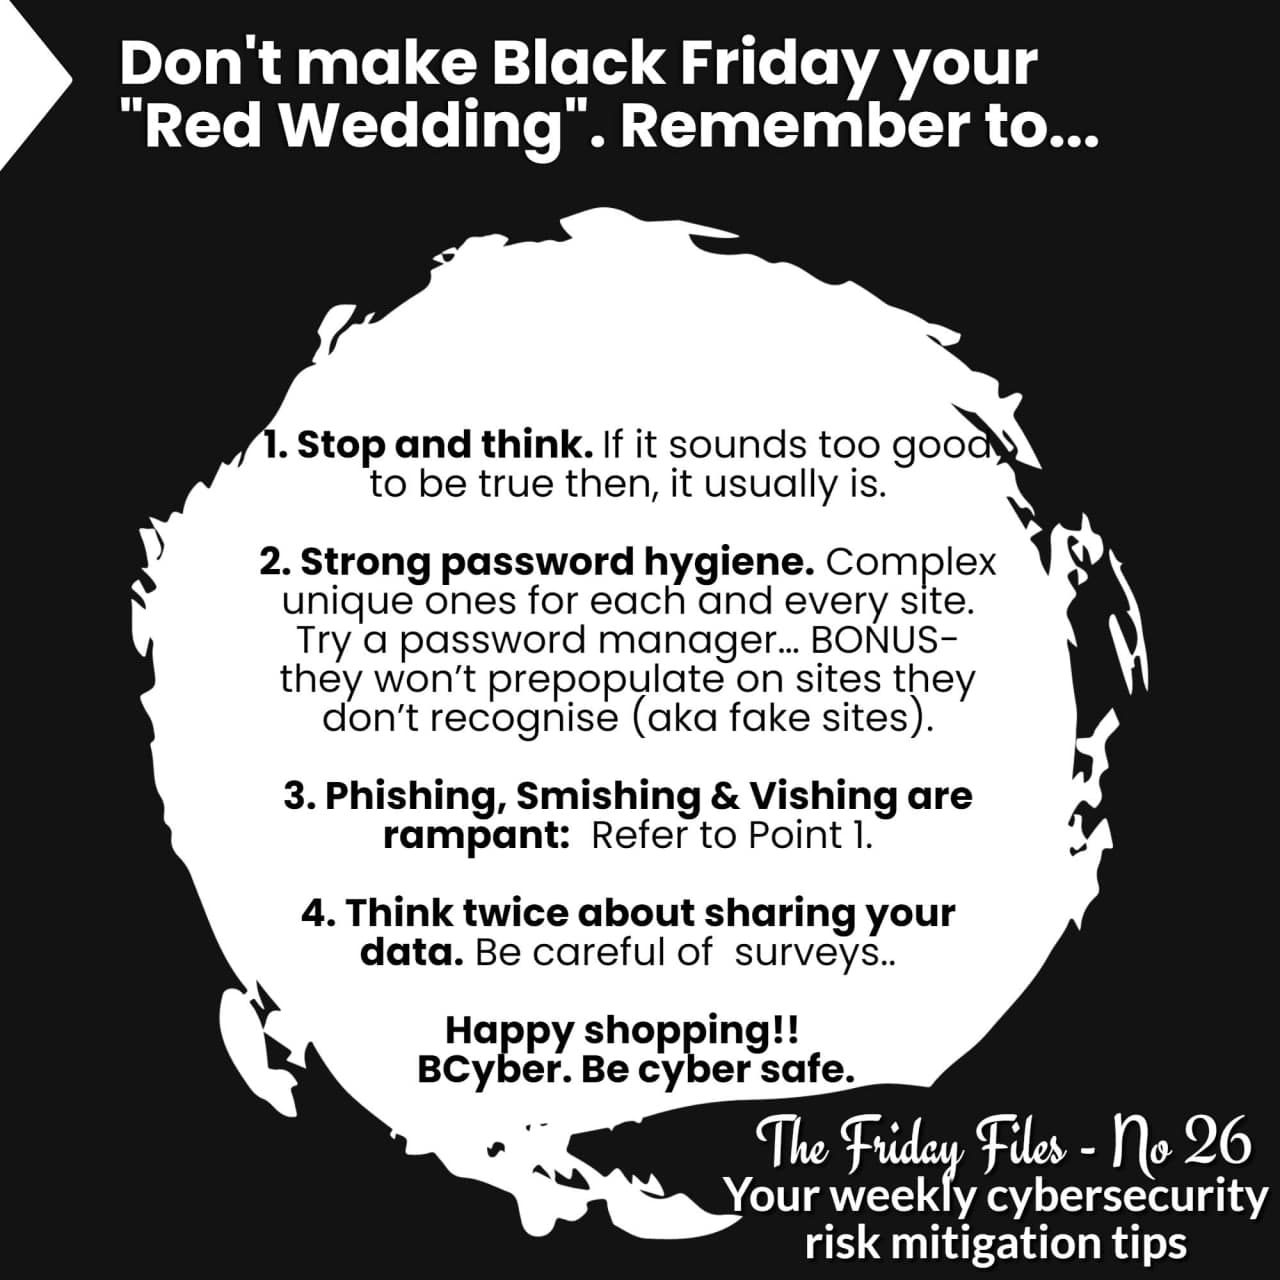 Don't make Black Friday your "Red Wedding". Remember to...